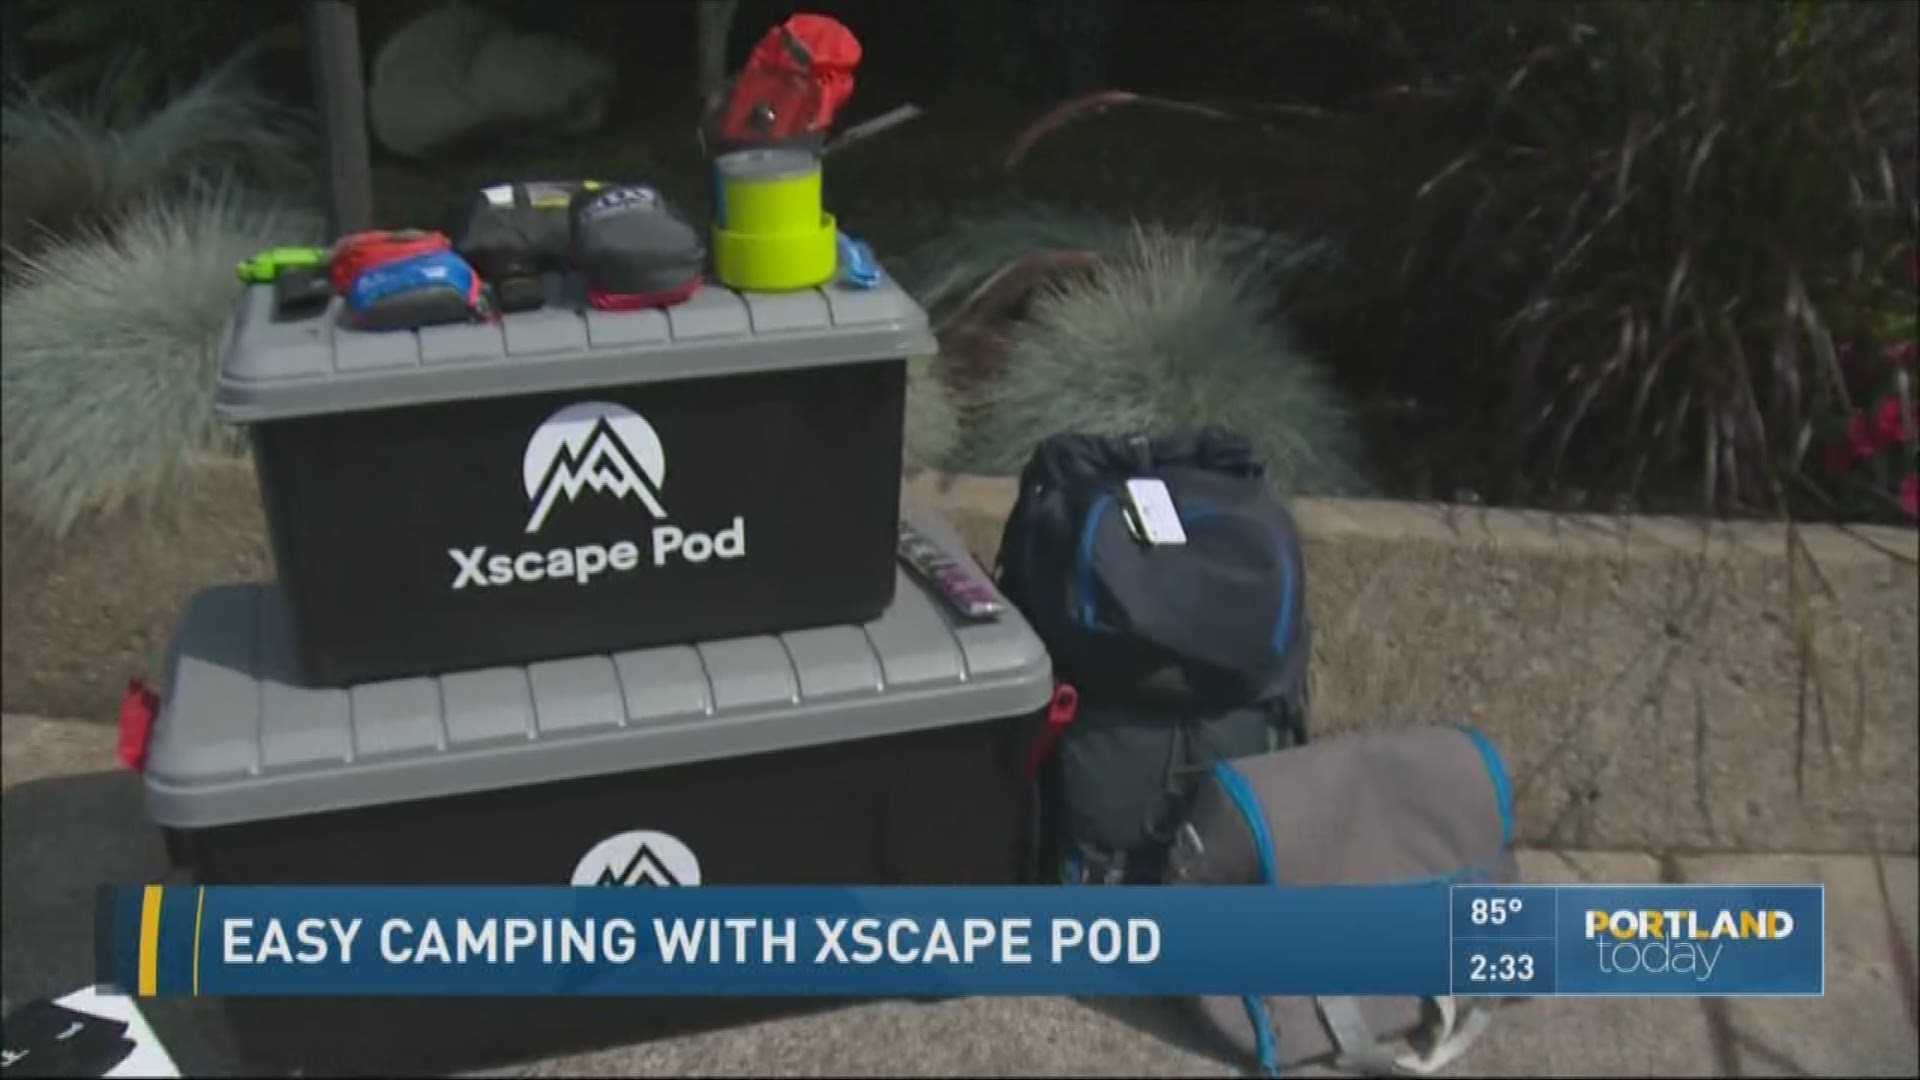 Easy camping with Xscape Pod